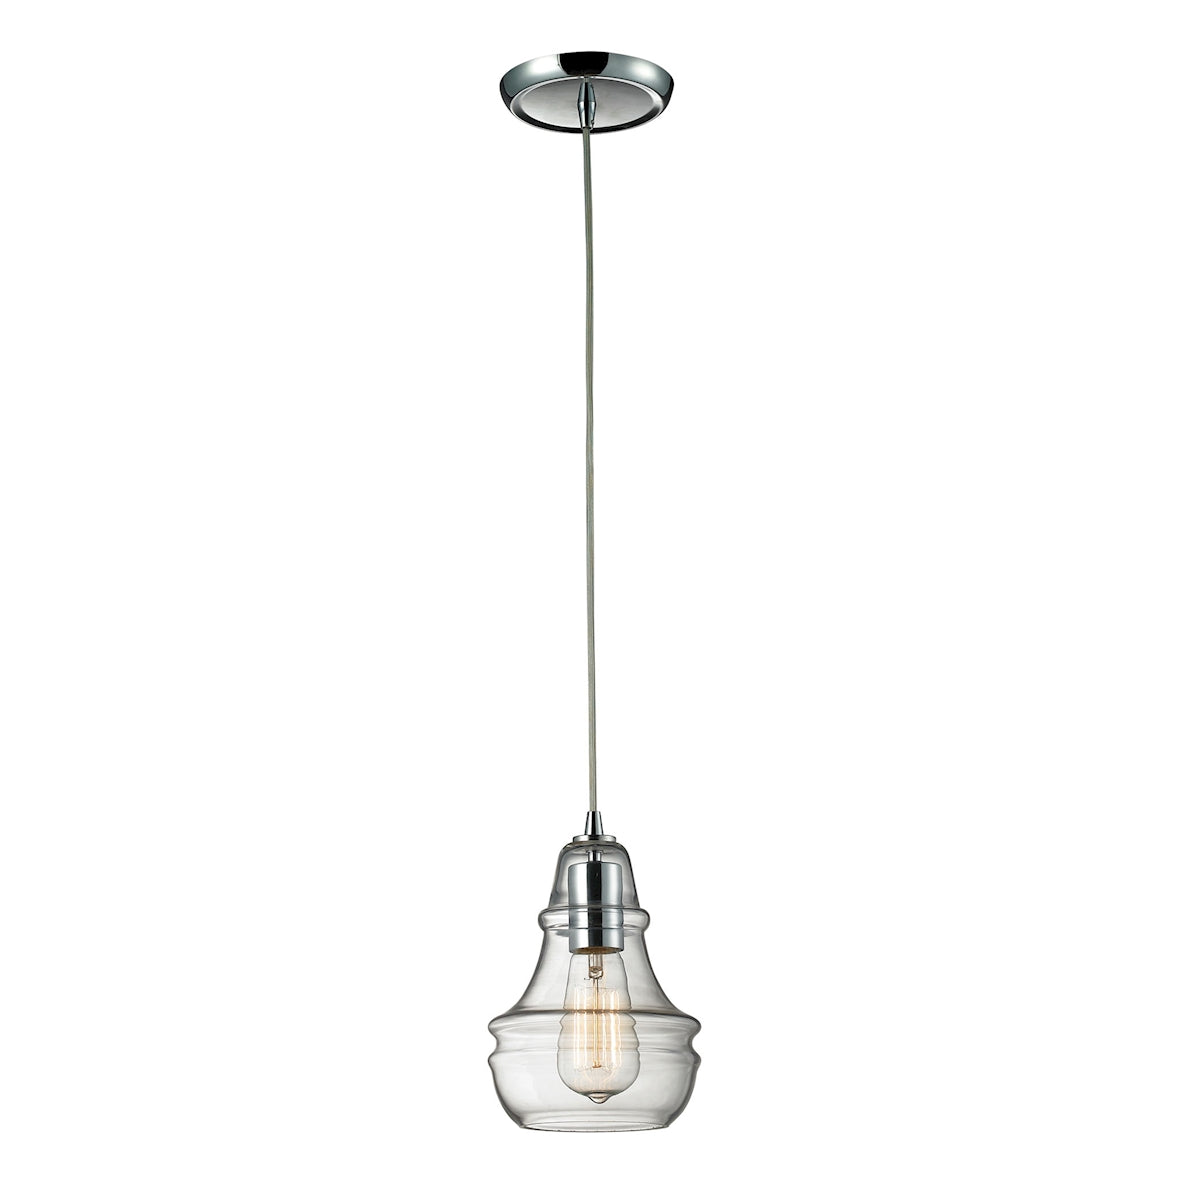 ELK Lighting 60057-1 Menlow Park 1-Light Mini Pendant in Polished Chrome with Smoked Glass